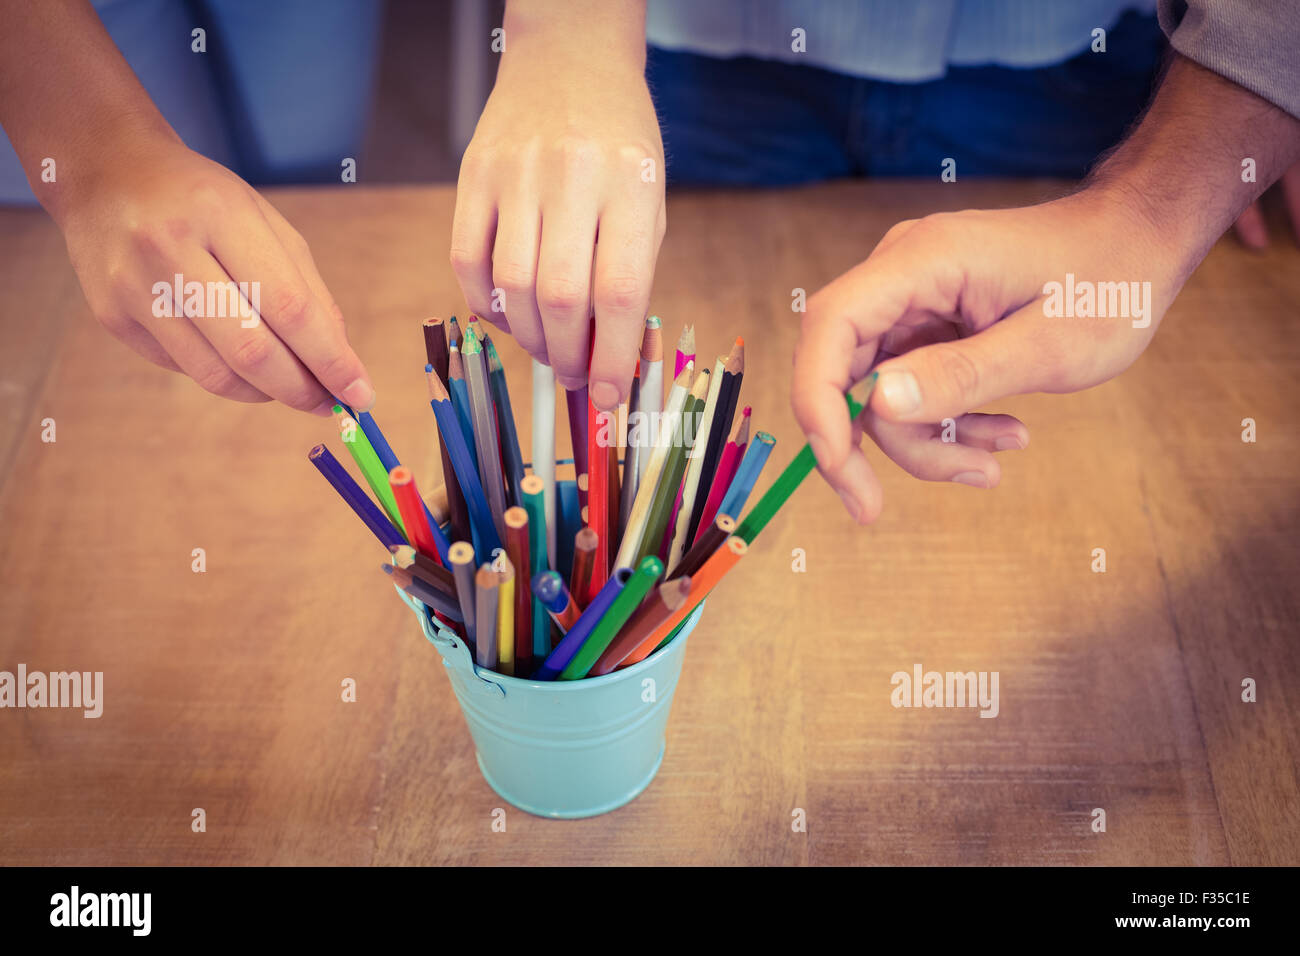 Business people choosing pencils from desk organizer Stock Photo